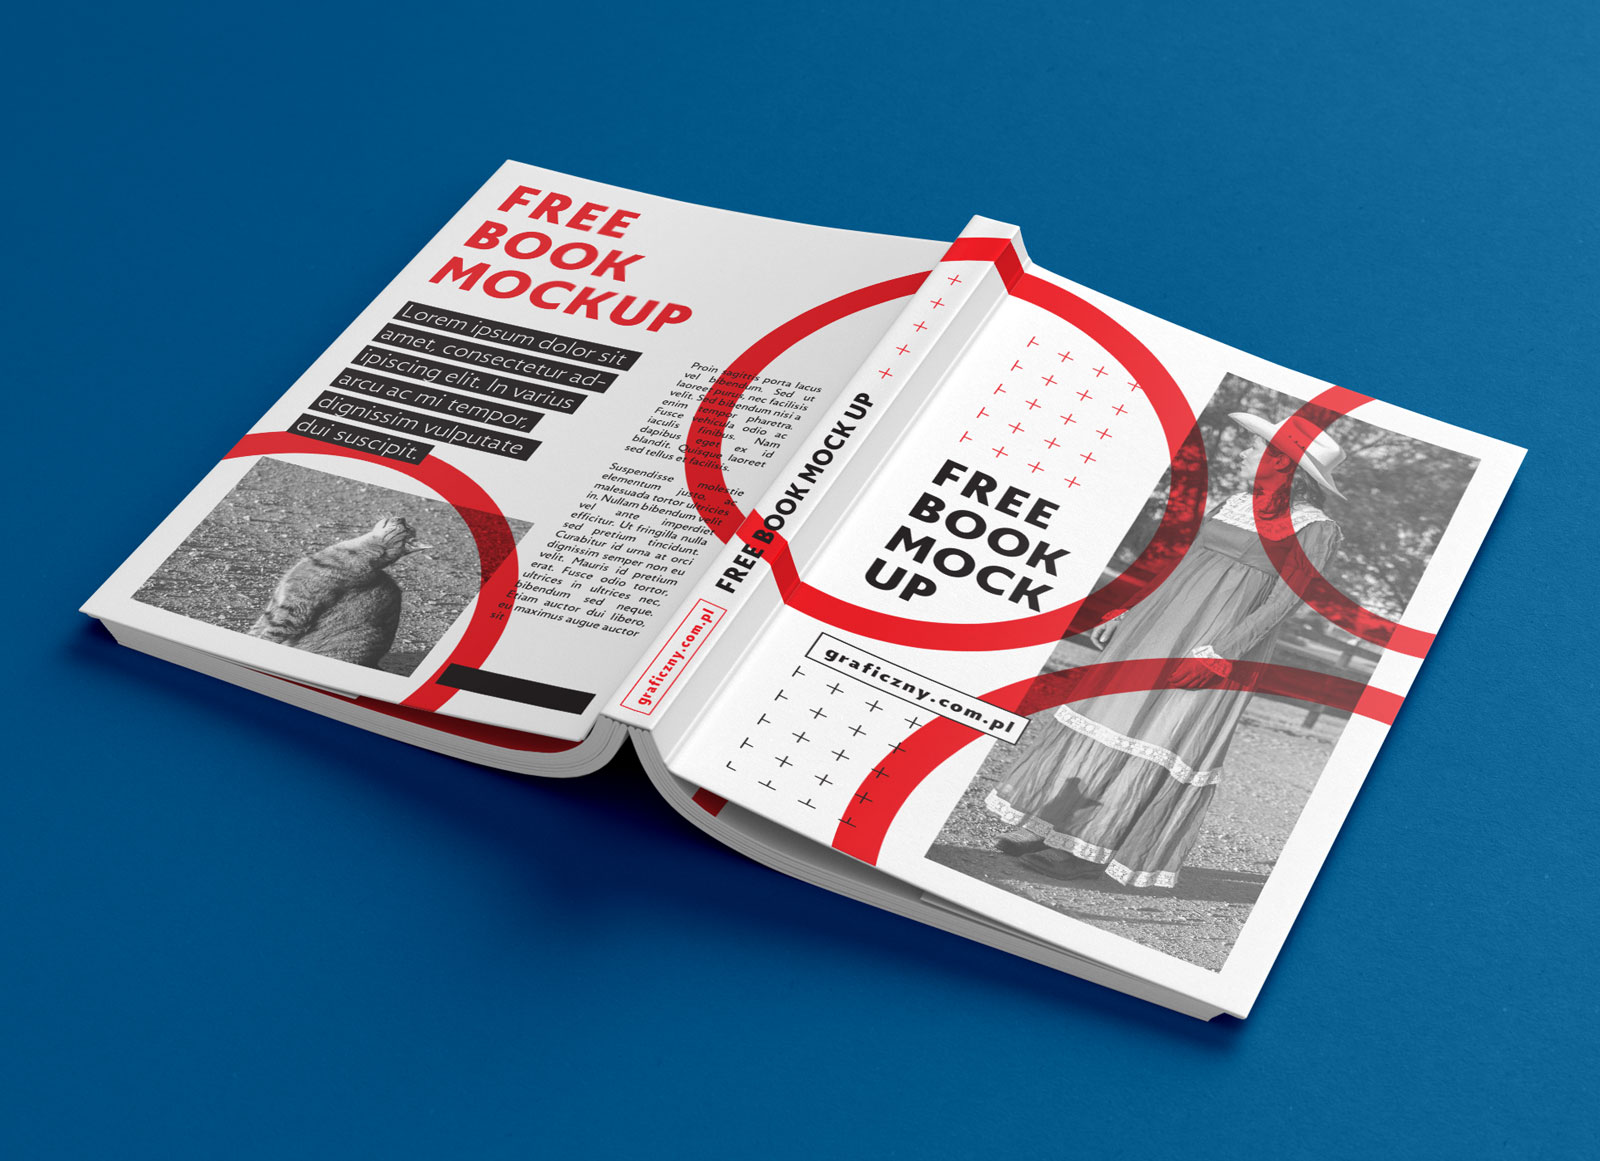 Download Free A4 Paperback Book Title & Inner Pages Mockup PSD ...